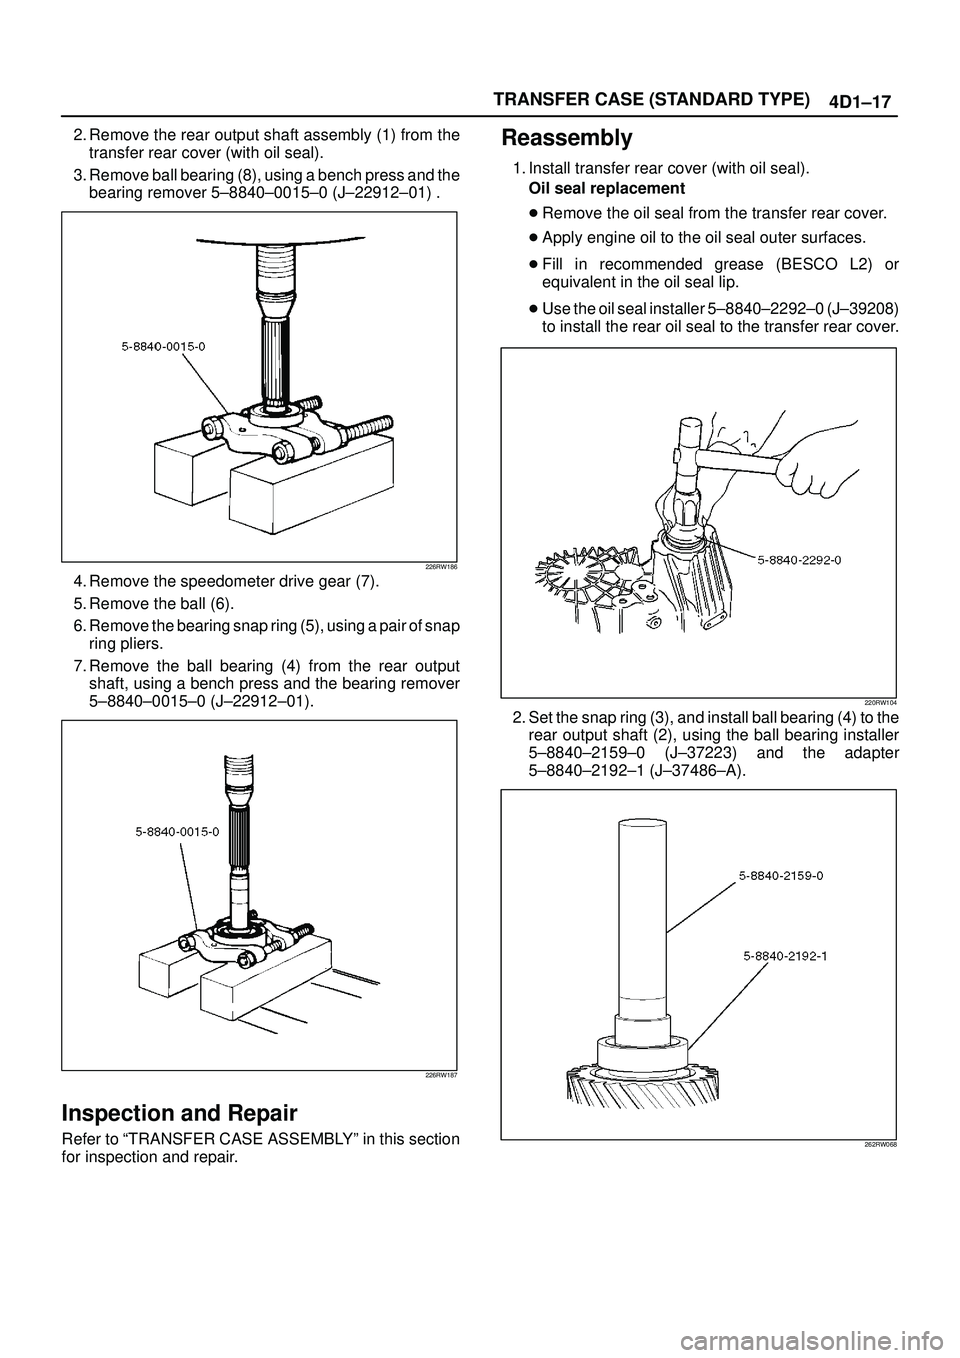 ISUZU TROOPER 1998  Service Repair Manual TRANSFER CASE (STANDARD TYPE)
4D1±17
2. Remove the rear output shaft assembly (1) from the
transfer rear cover (with oil seal).
3. Remove ball bearing (8), using a bench press and the
bearing remover